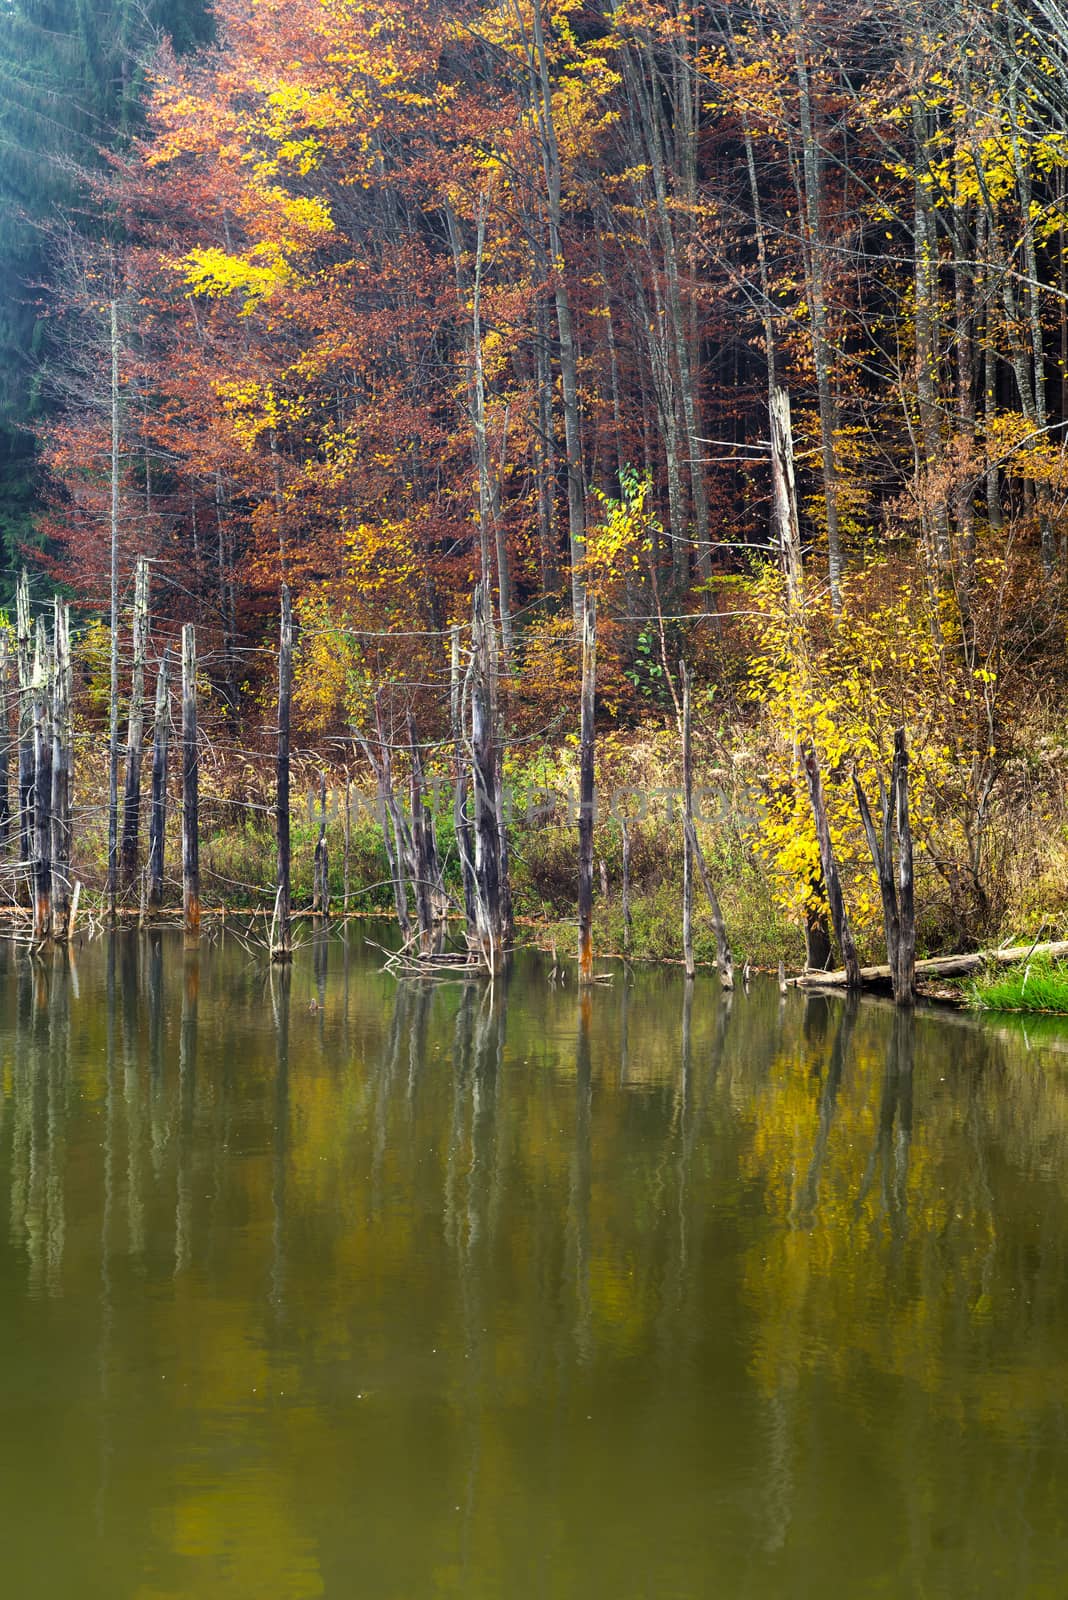 Reflection of dead tree trunks in water, autumn forest scene behind. Cuejdel lake was born 30 years ago (a landfall on river Cuejdel) in Romania, Today is the biggest natural dam lake in Europe.